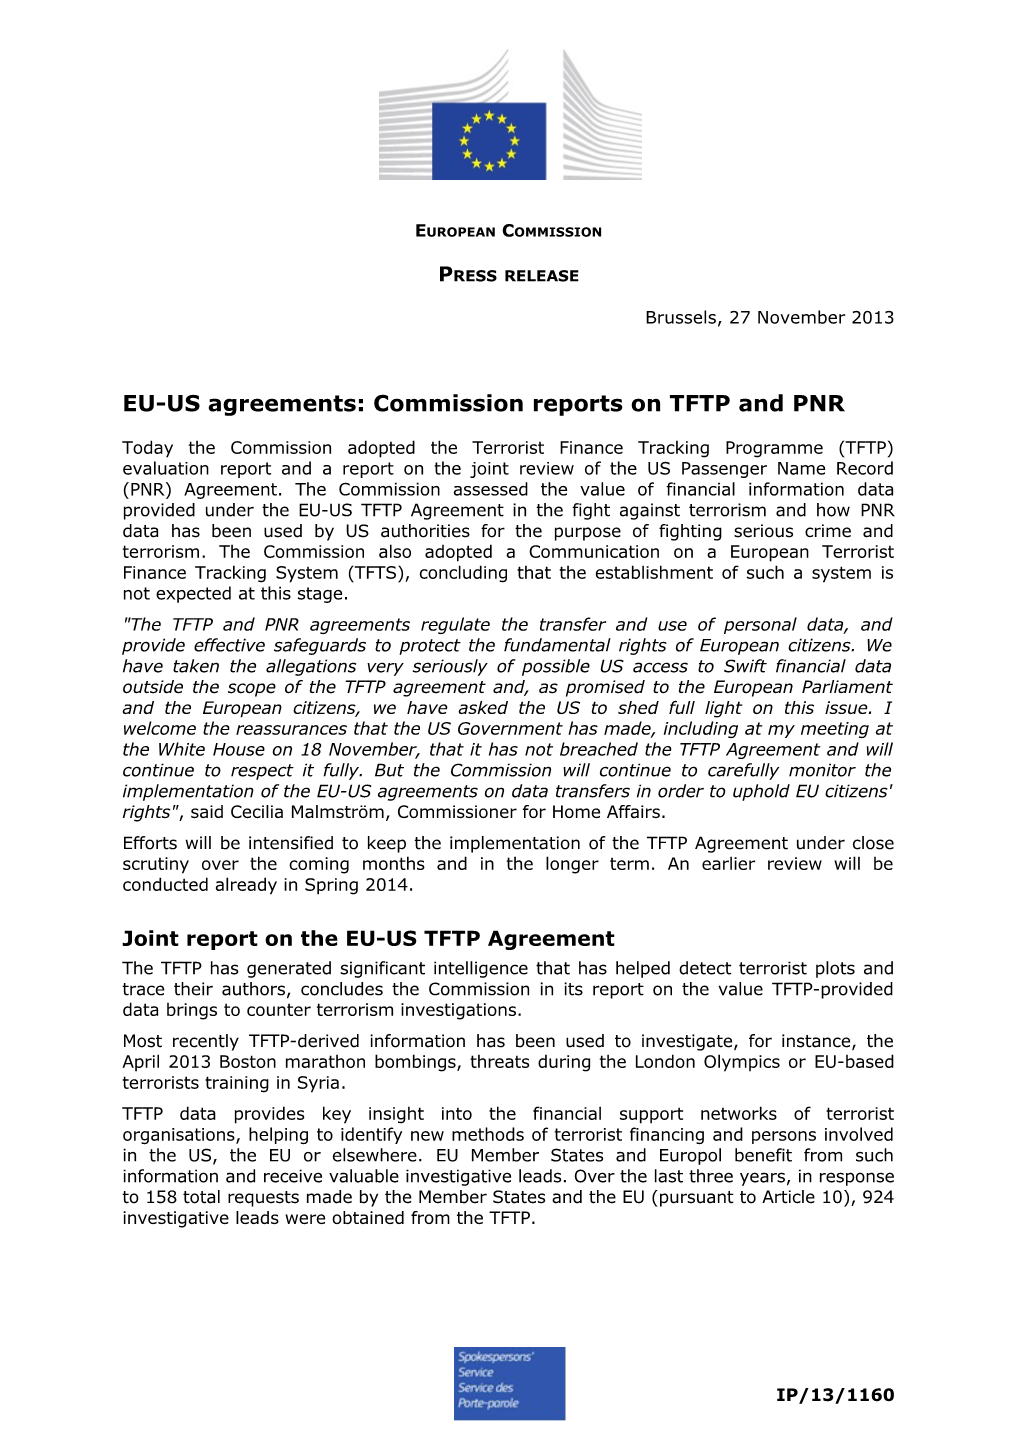 EU-US Agreements: Commission Reports on TFTP and PNR